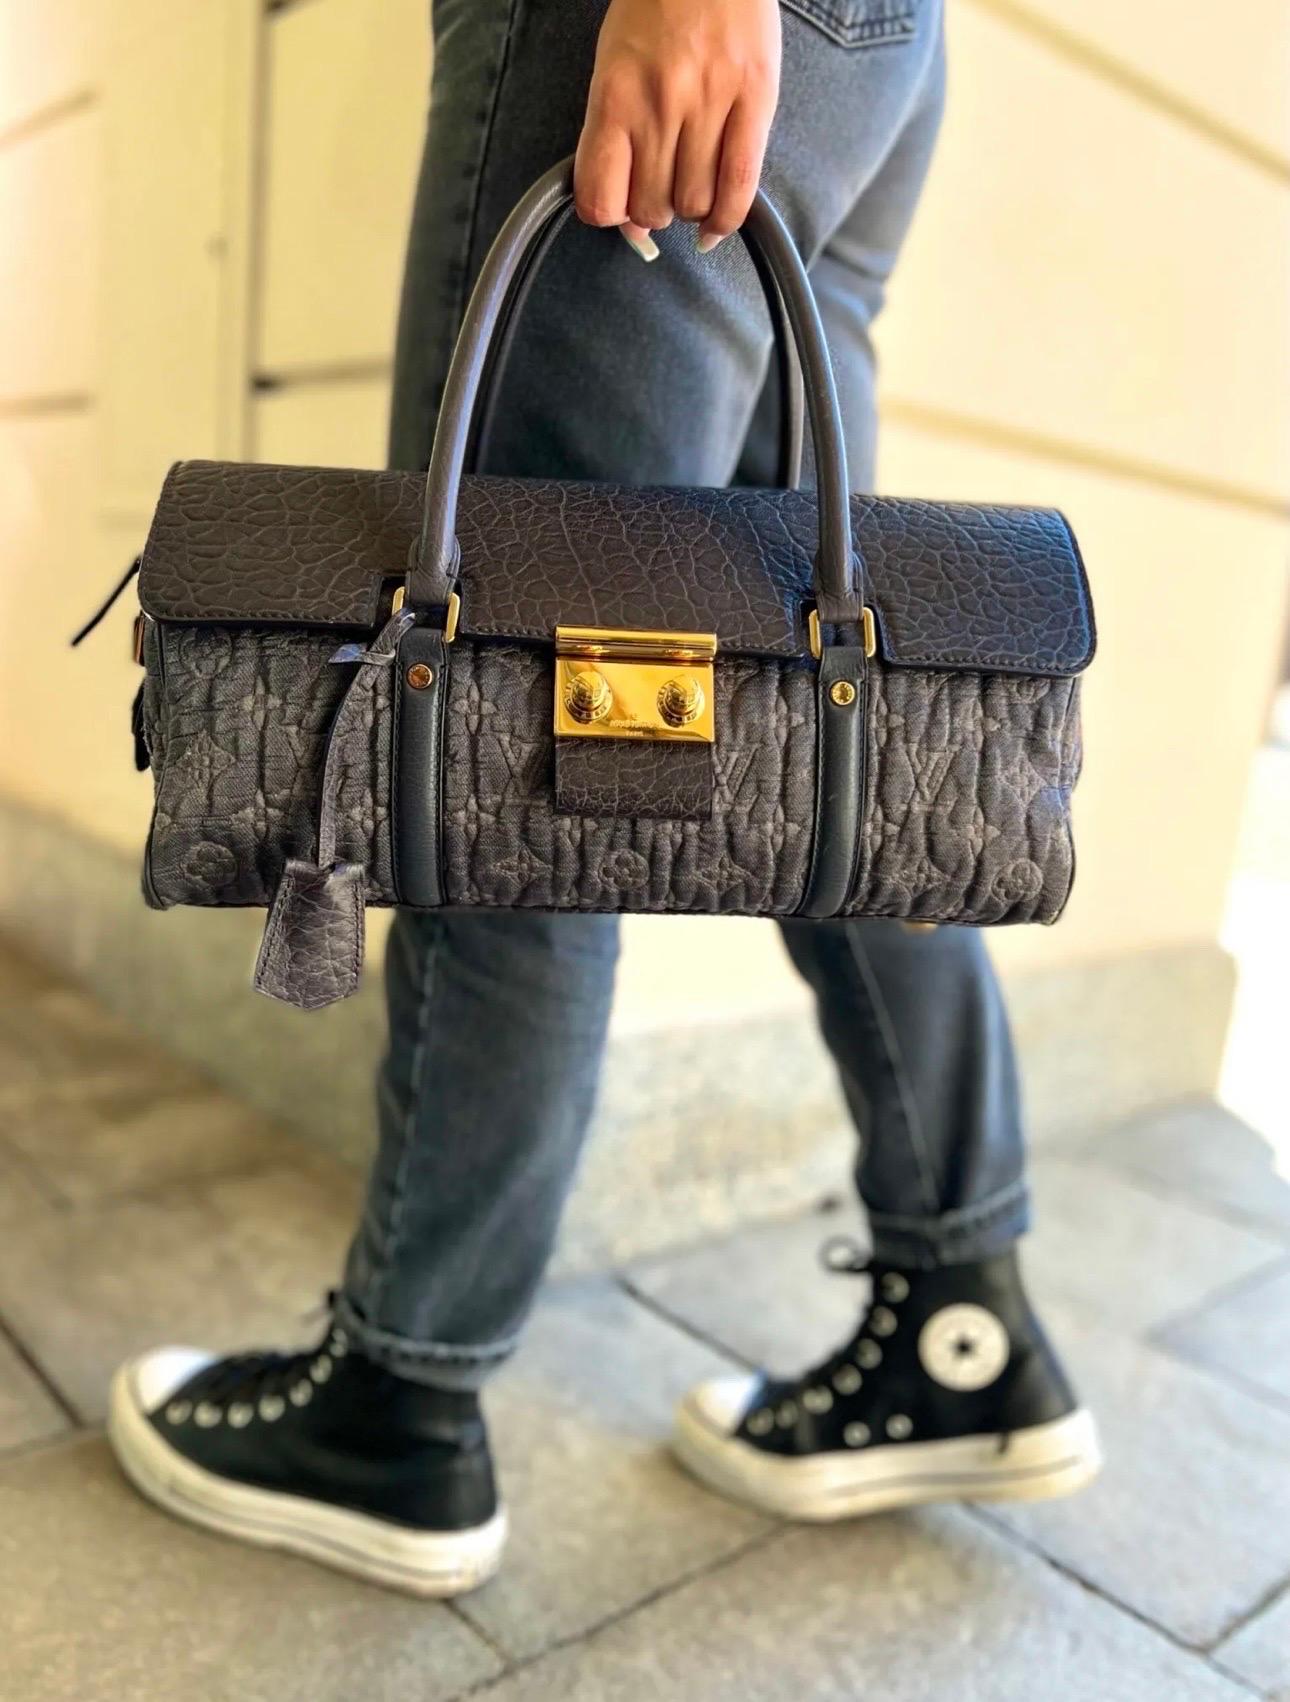 Louis Vuitton signed bag, Volupte Psyche model, limited edition, made in blue leather with gold hardware.

Equipped with a flap closure with interlocking, internally lined in black fabric, quite large.

Equipped with a double rigid leather handle